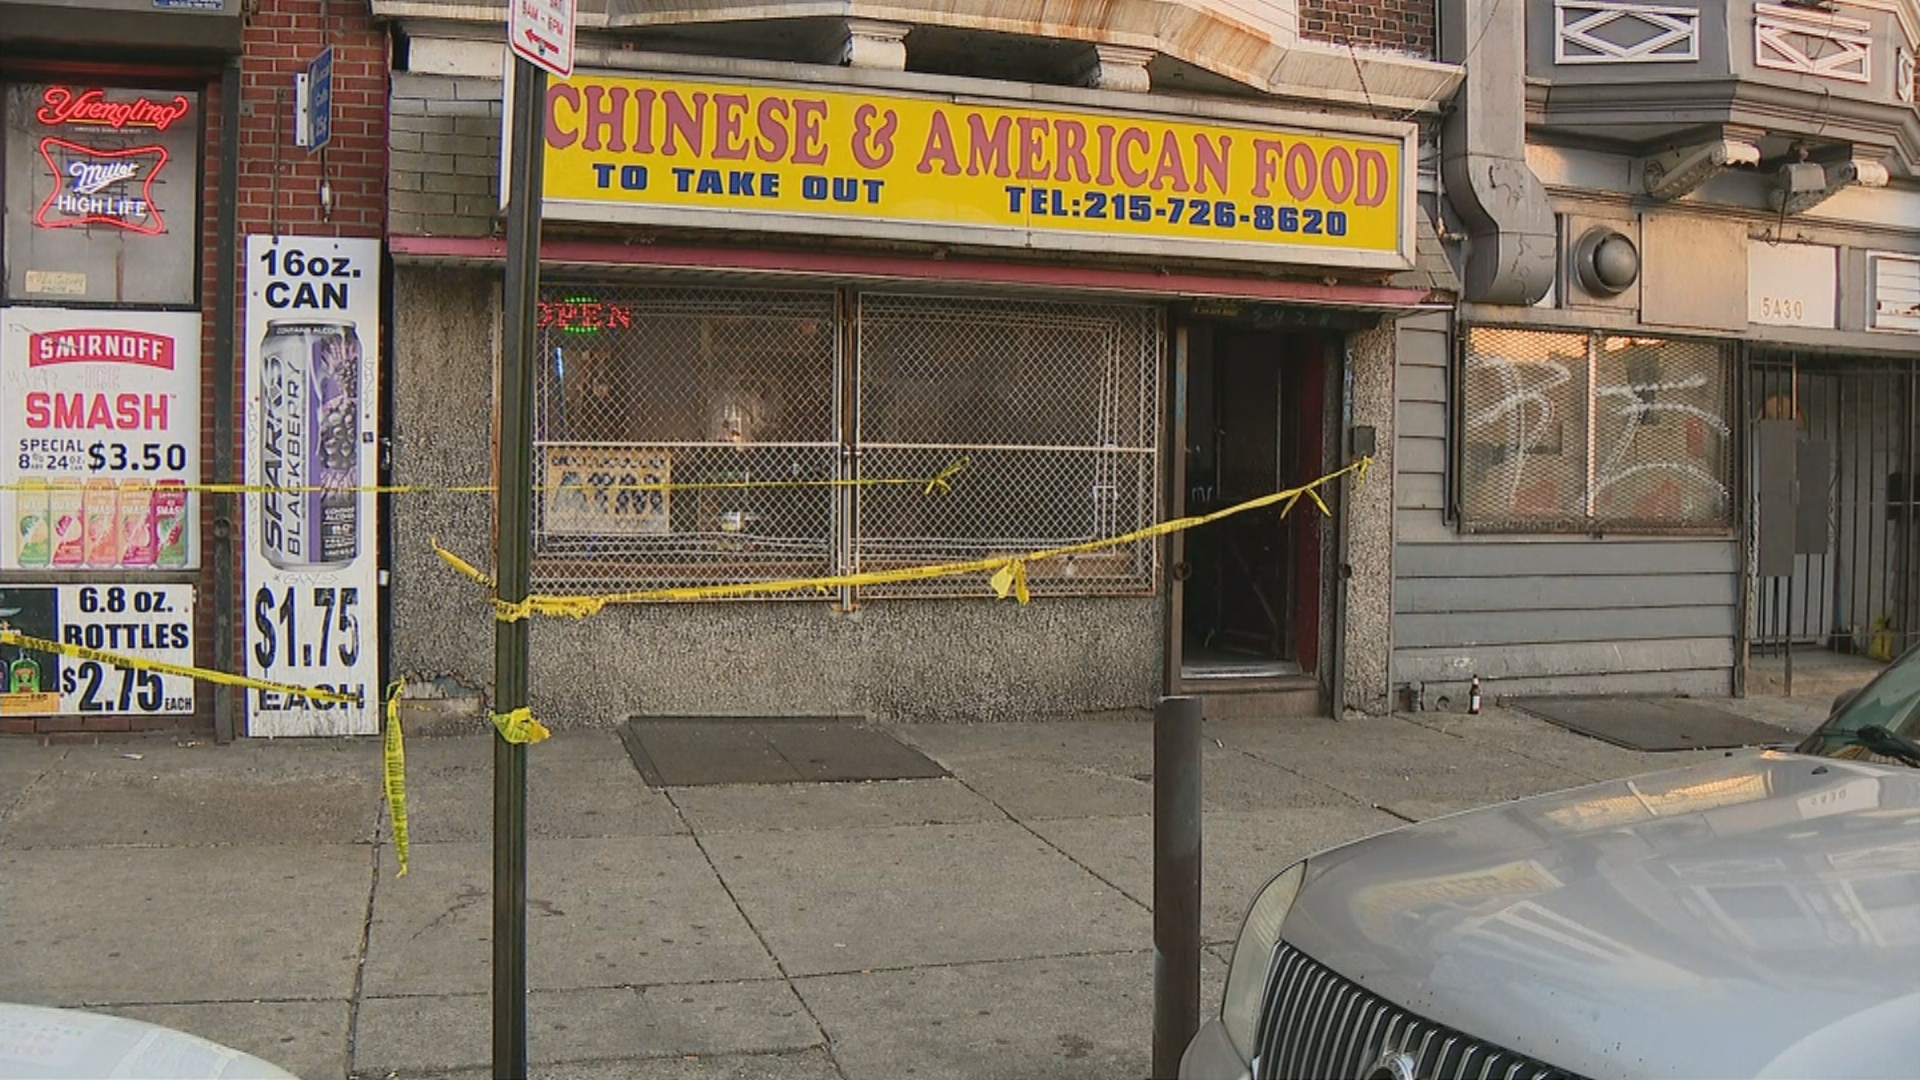 Kingsessing Restaurant Owner Shoots Armed Robbery Suspect, Police Say – CBS Philly